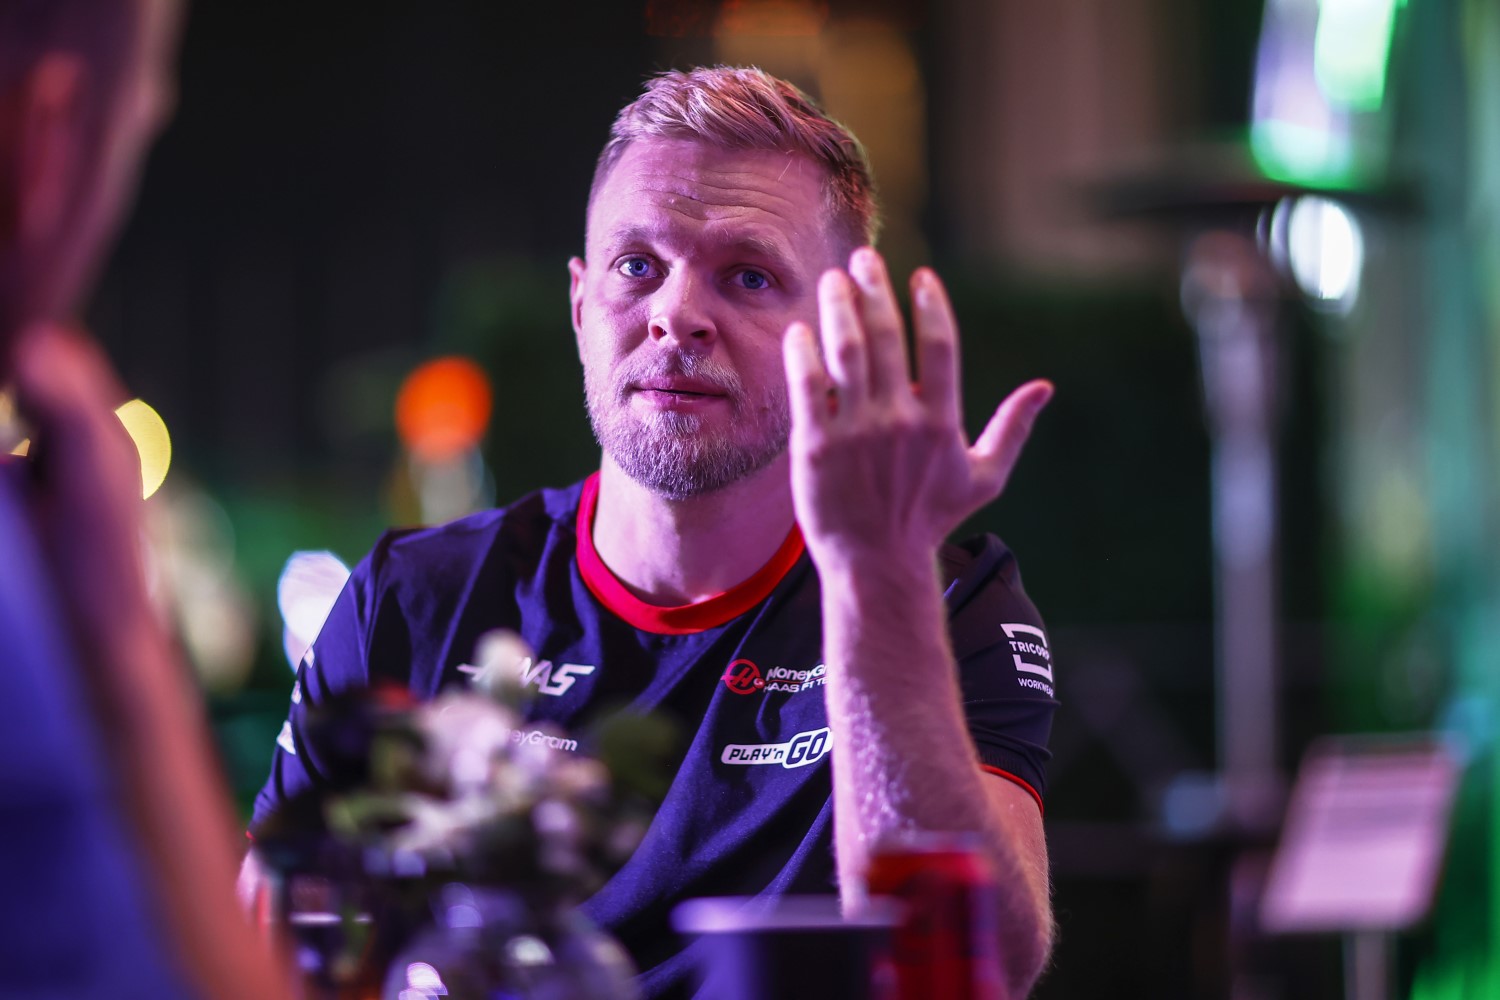 Kevin Magnussen, Haas F1 Team during the Las Vegas GP at Streets of Las Vegas on Wednesday November 15, 2023, United States of America. (Photo by Andy Hone / LAT Images)